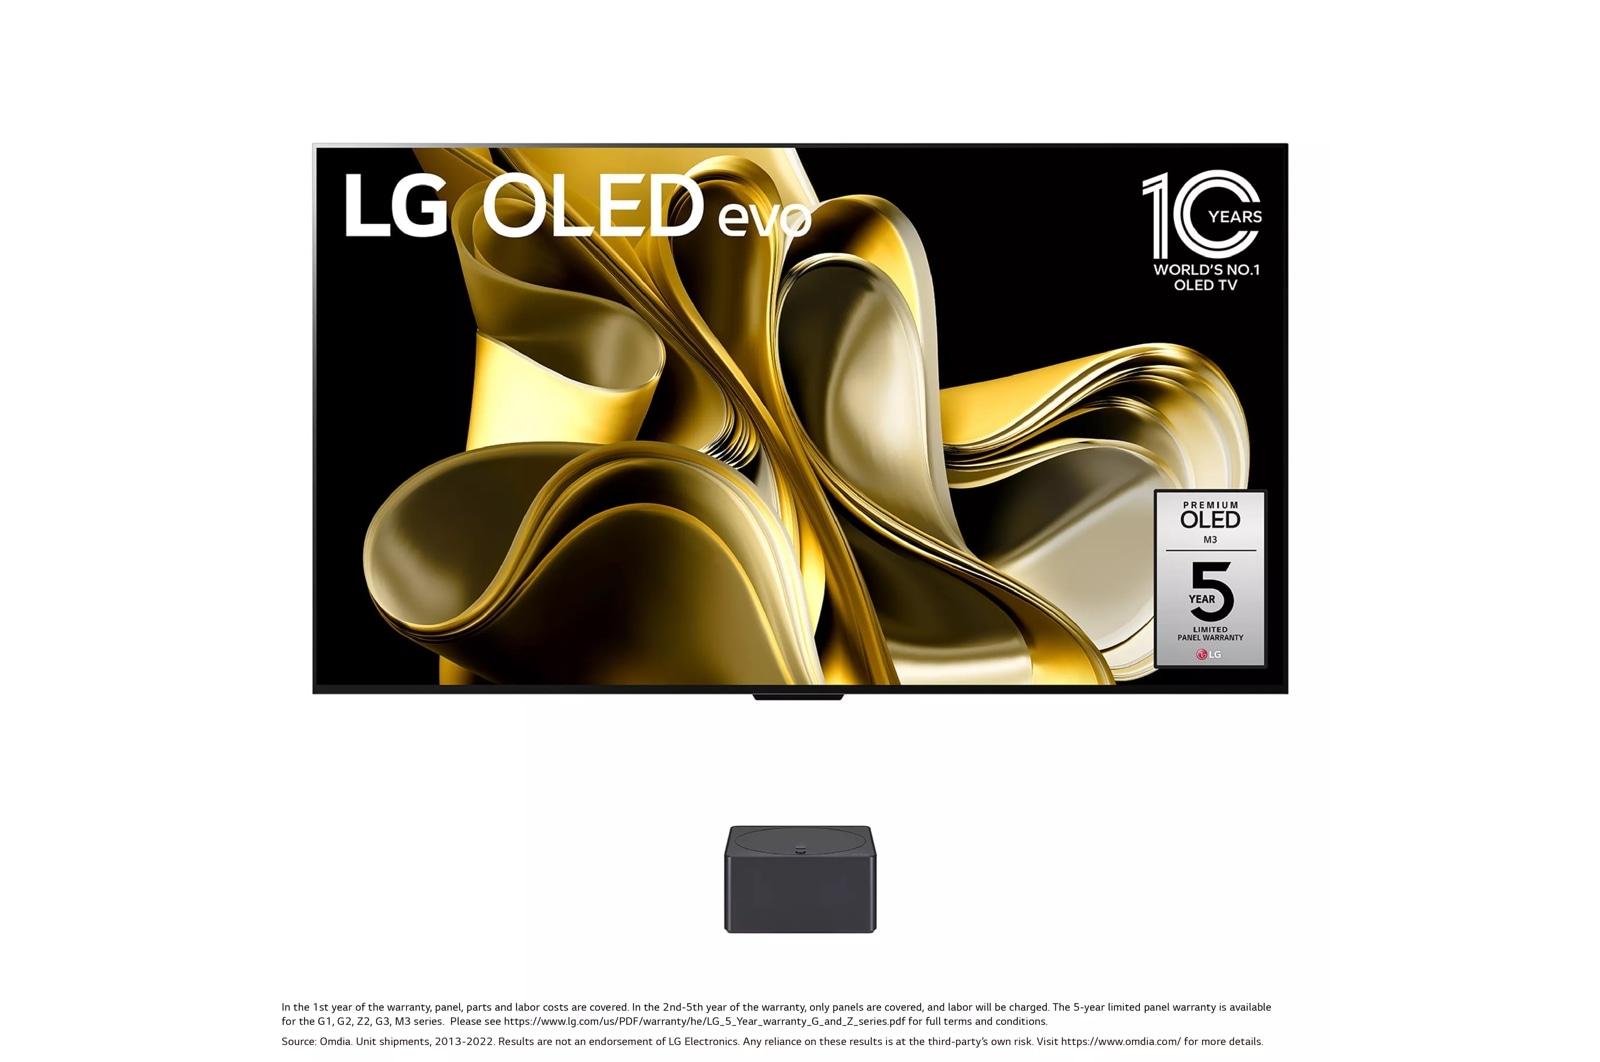 LG OLED evo M Series 83-Inch Class 4K Smart TV with Wireless 4K Connectivity